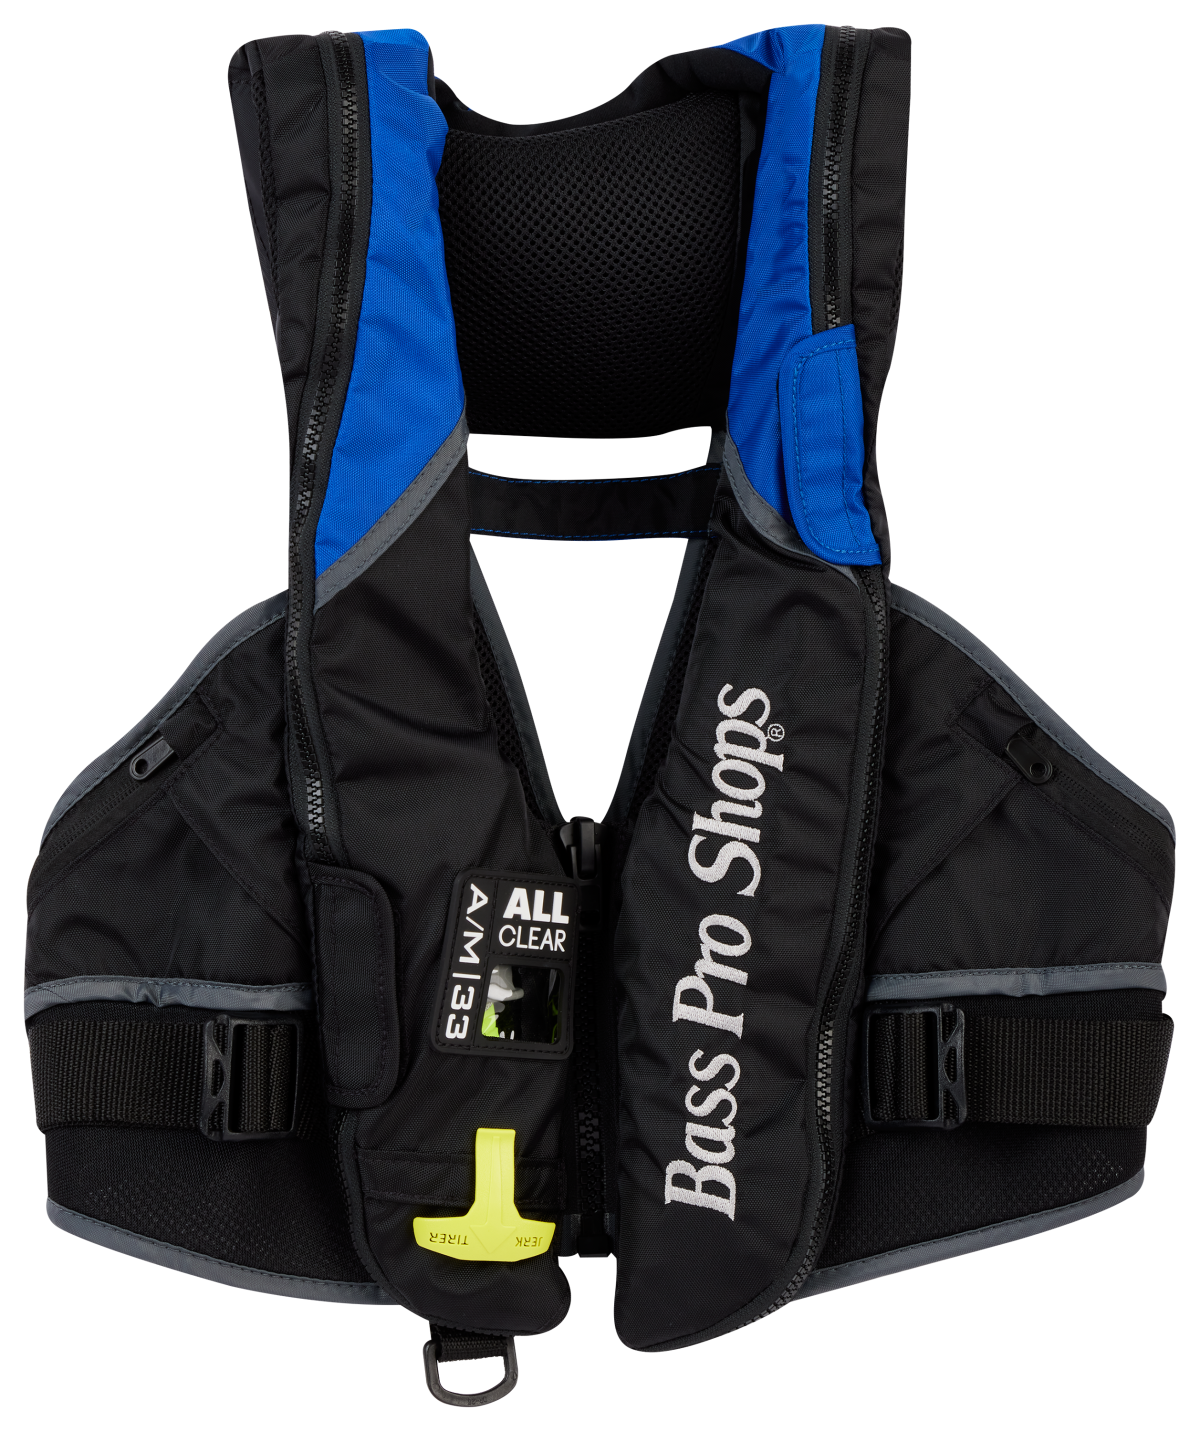 Bass Pro Shops AM33 Deluxe All-Clear Auto-Inflatable Life Jacket